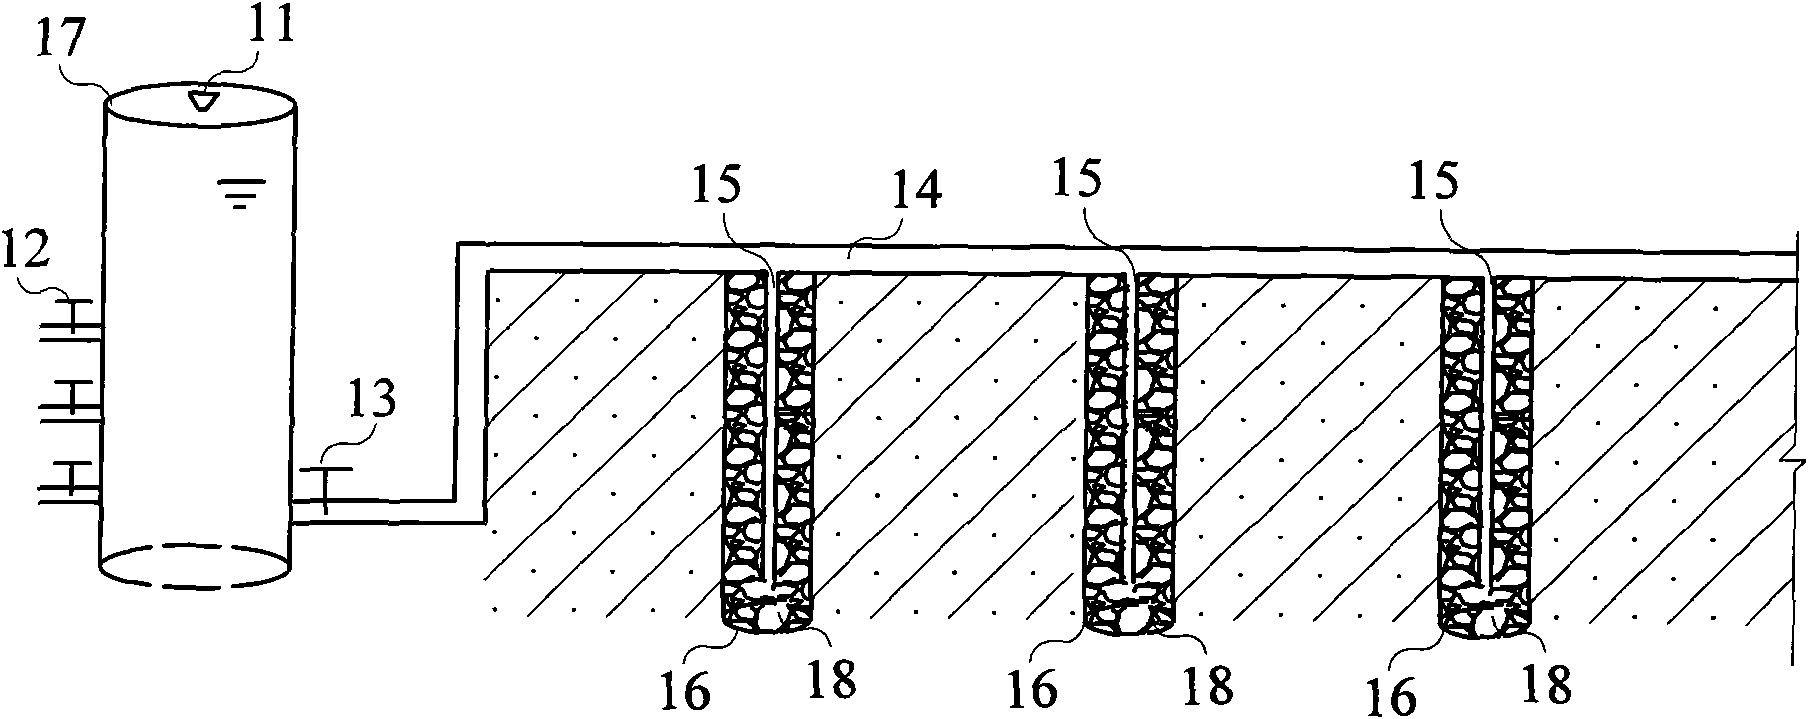 Self-suction localized irrigation system